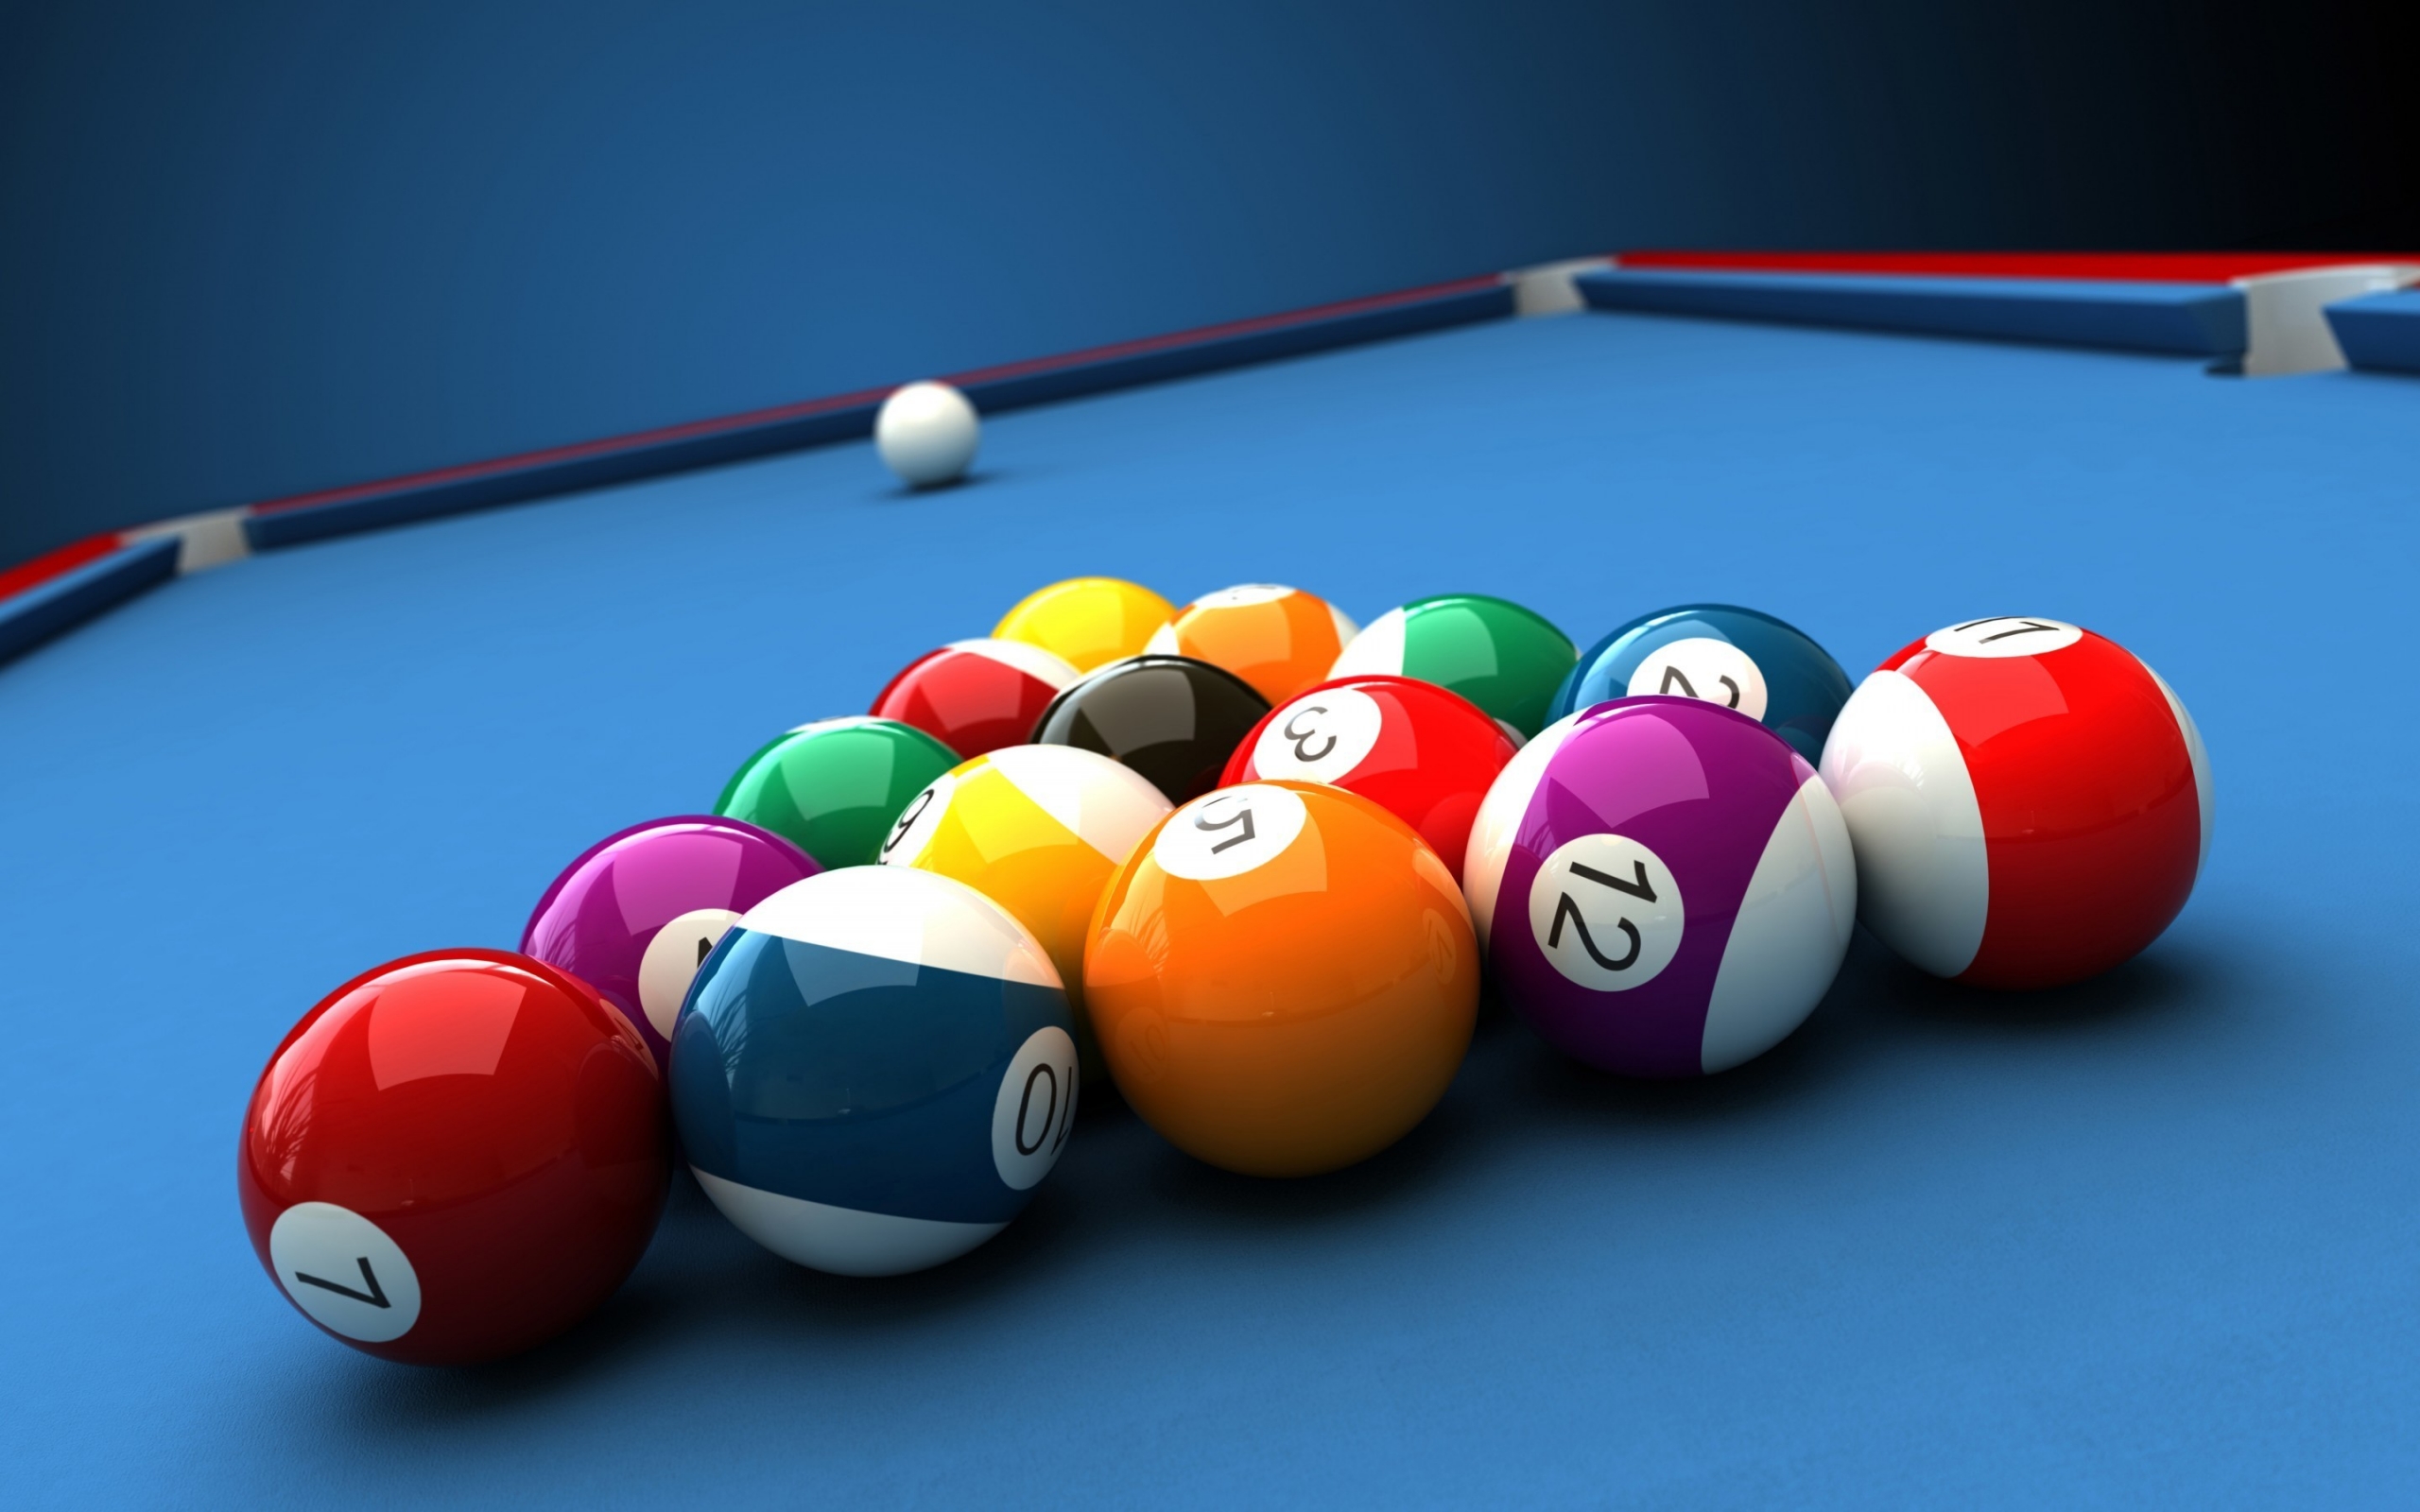 Billiards Table and Balls for 2560 x 1600 widescreen resolution